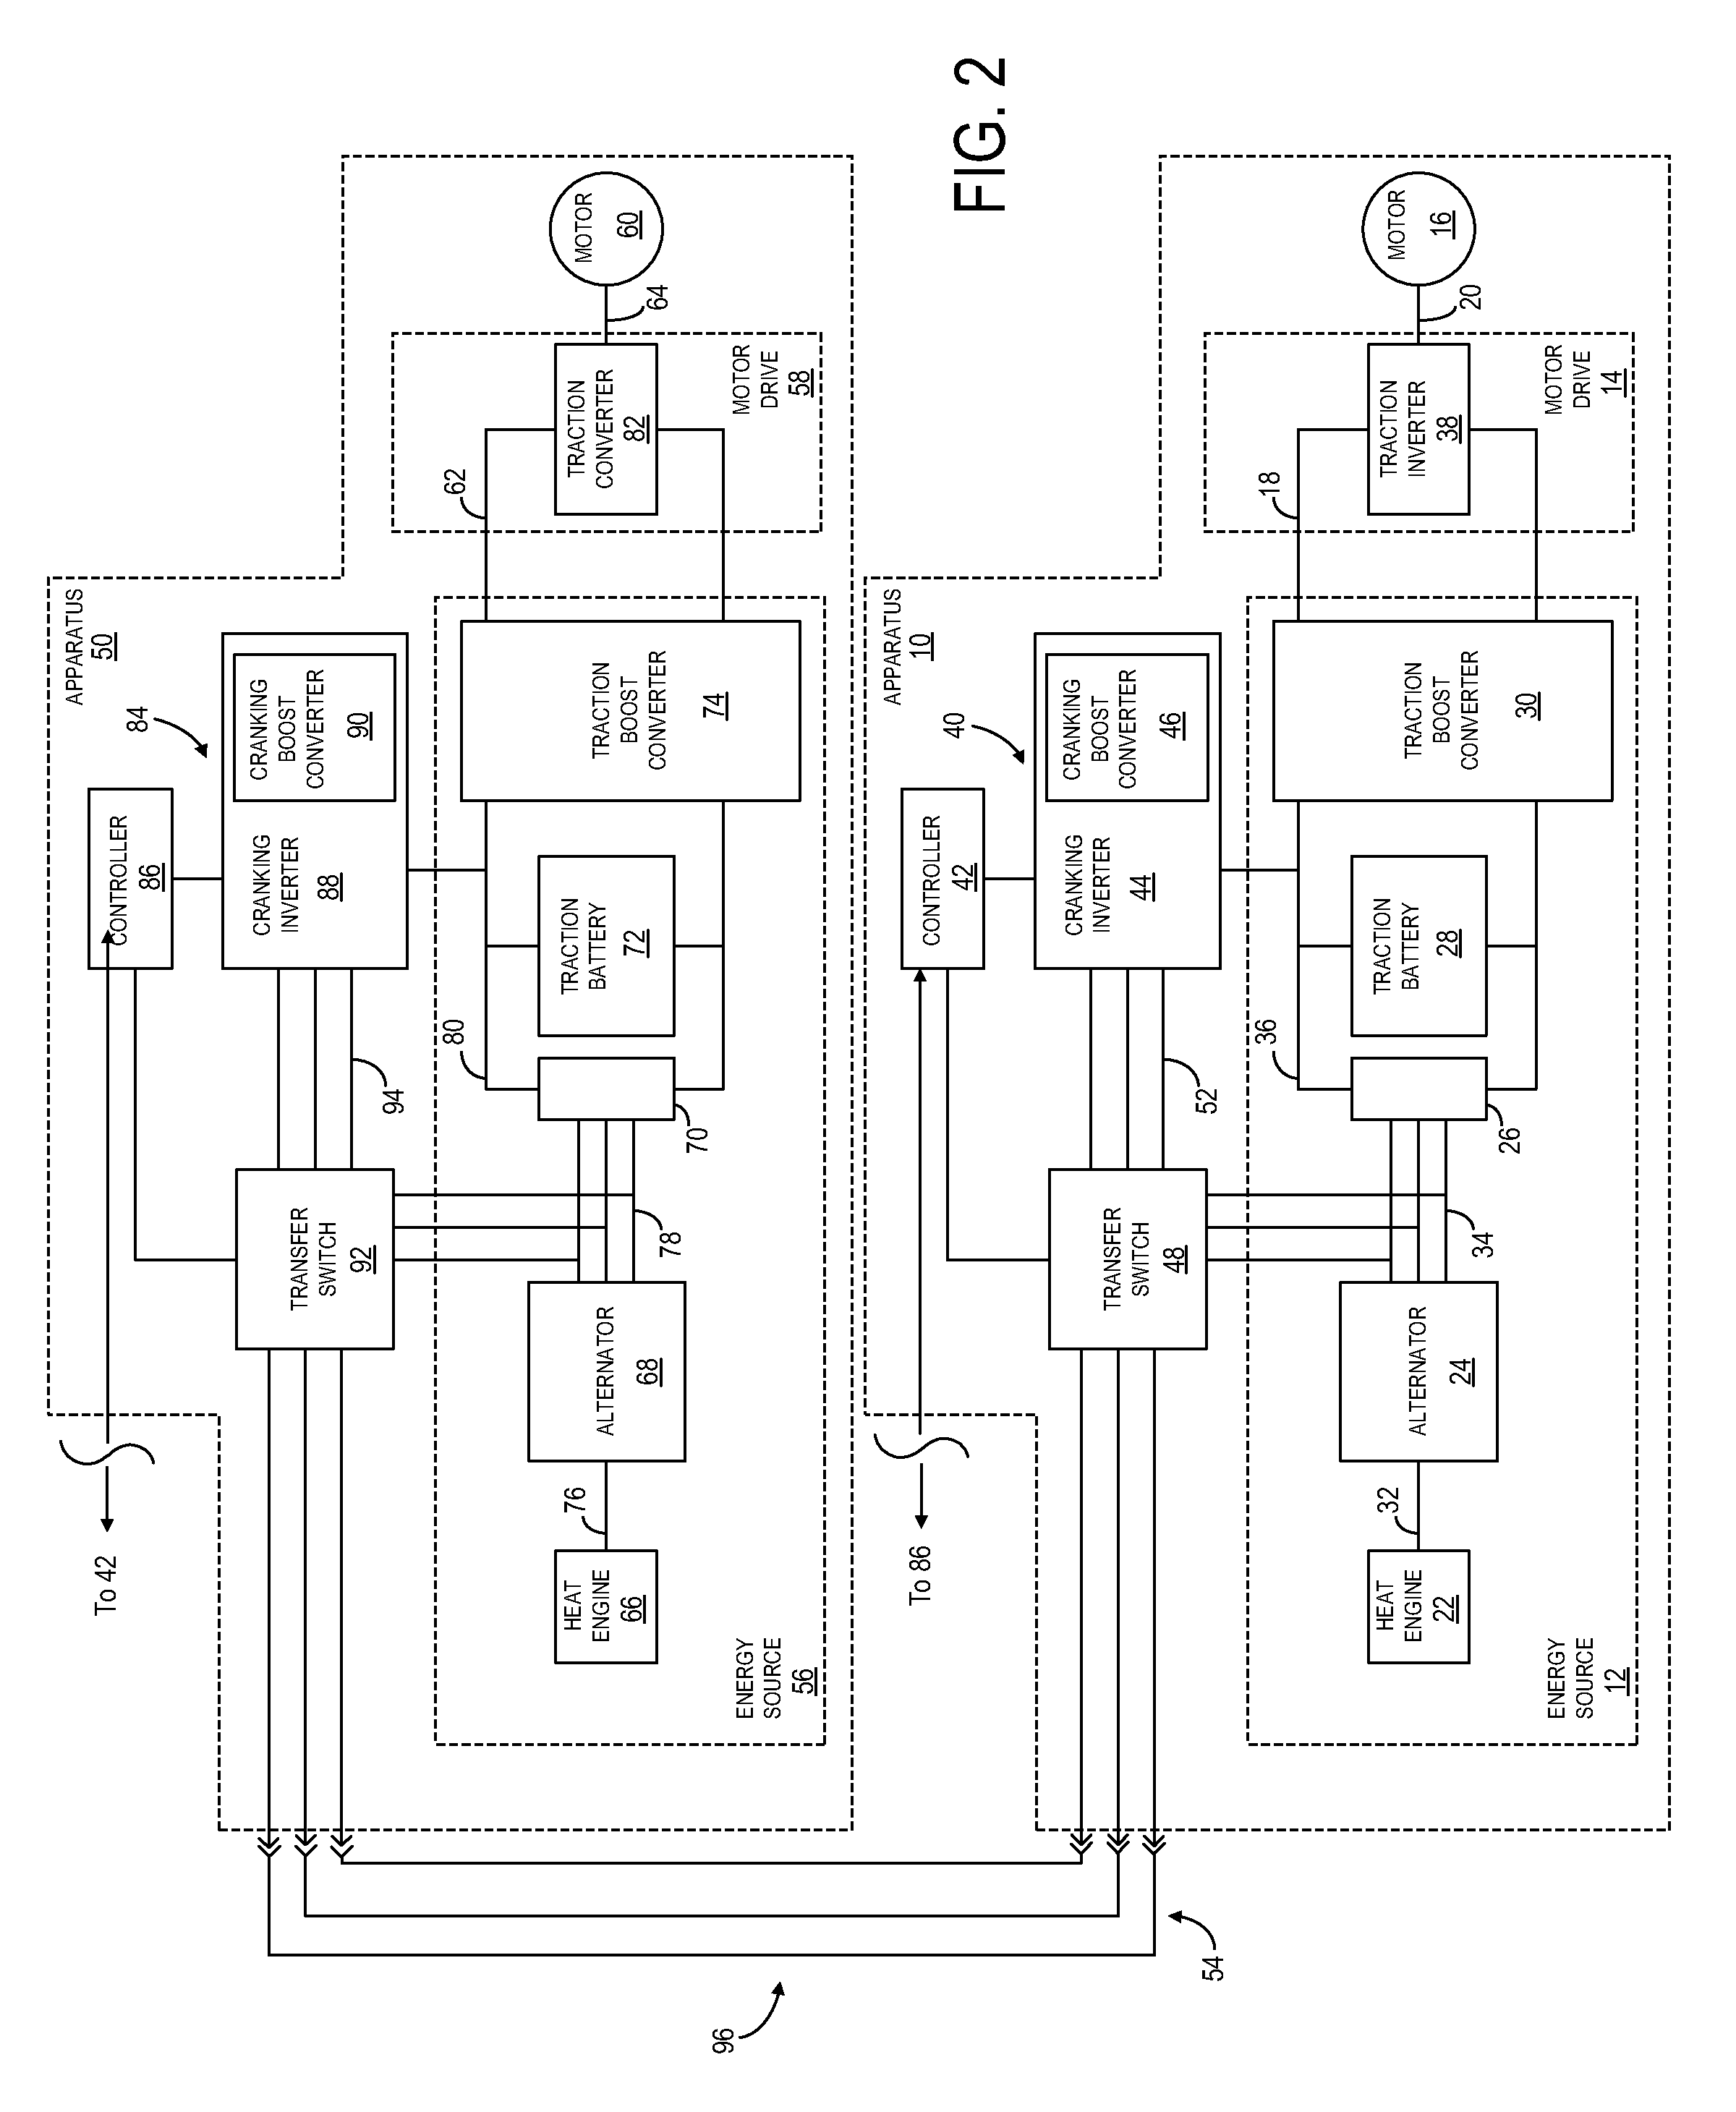 Method and apparatus for producing tractive effort with interface to other apparatus